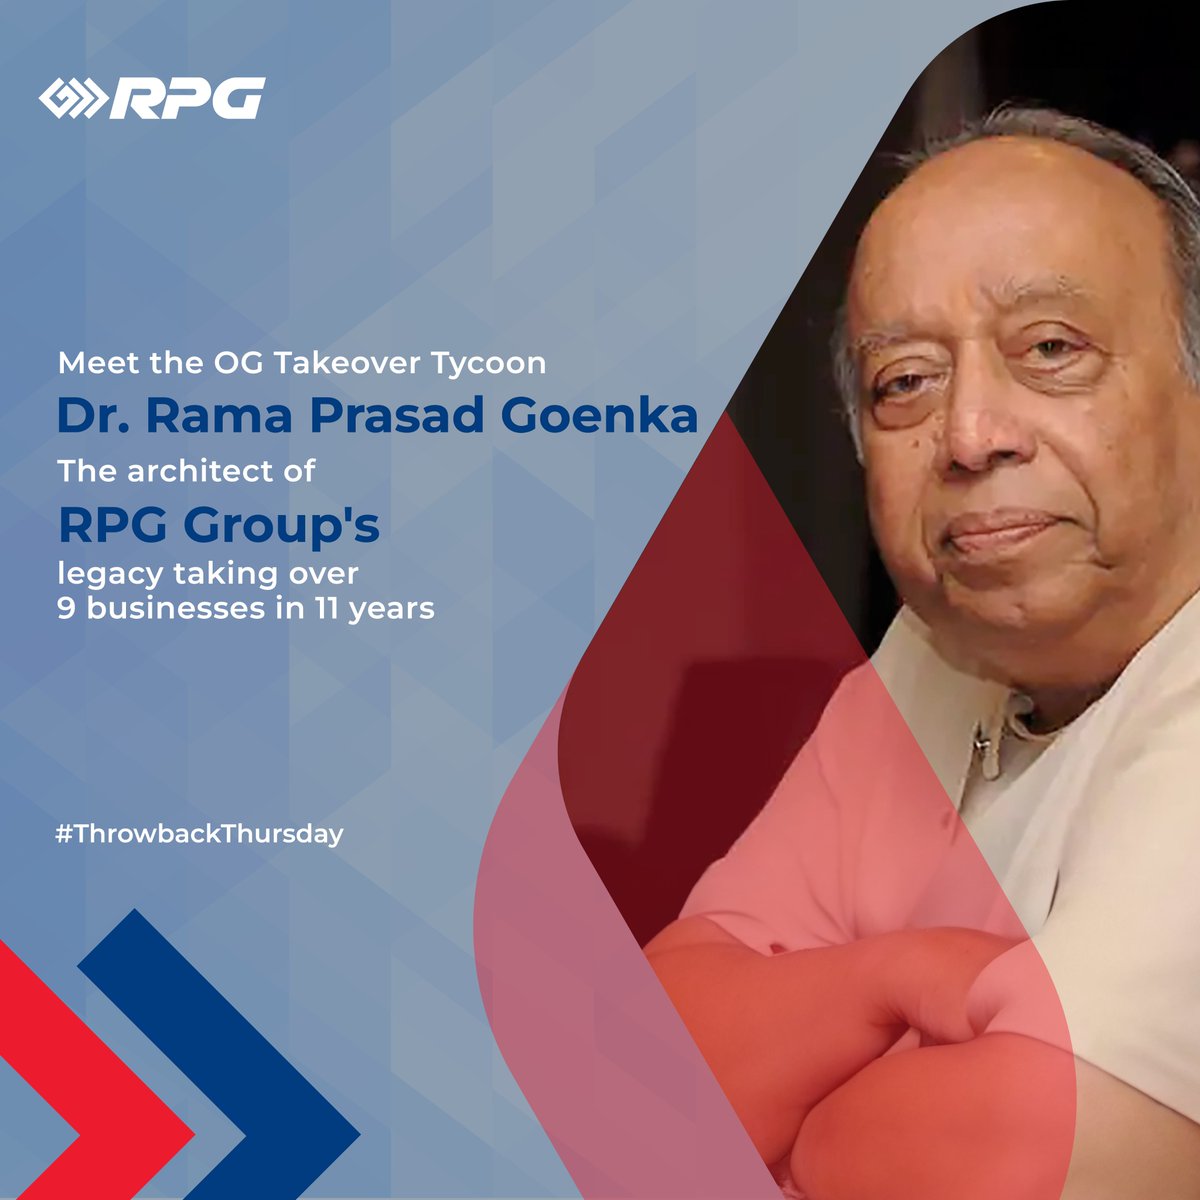 A visionary who defied limits, Dr. Rama Prasad Goenka has reshaped the corporate landscape with his visionary spirit and daring ambition. He is an inspiring legacy of relentless pursuit and bold dreams. #ThisIsRPG #ThrowbackThursday #VisionaryLeader #Leader